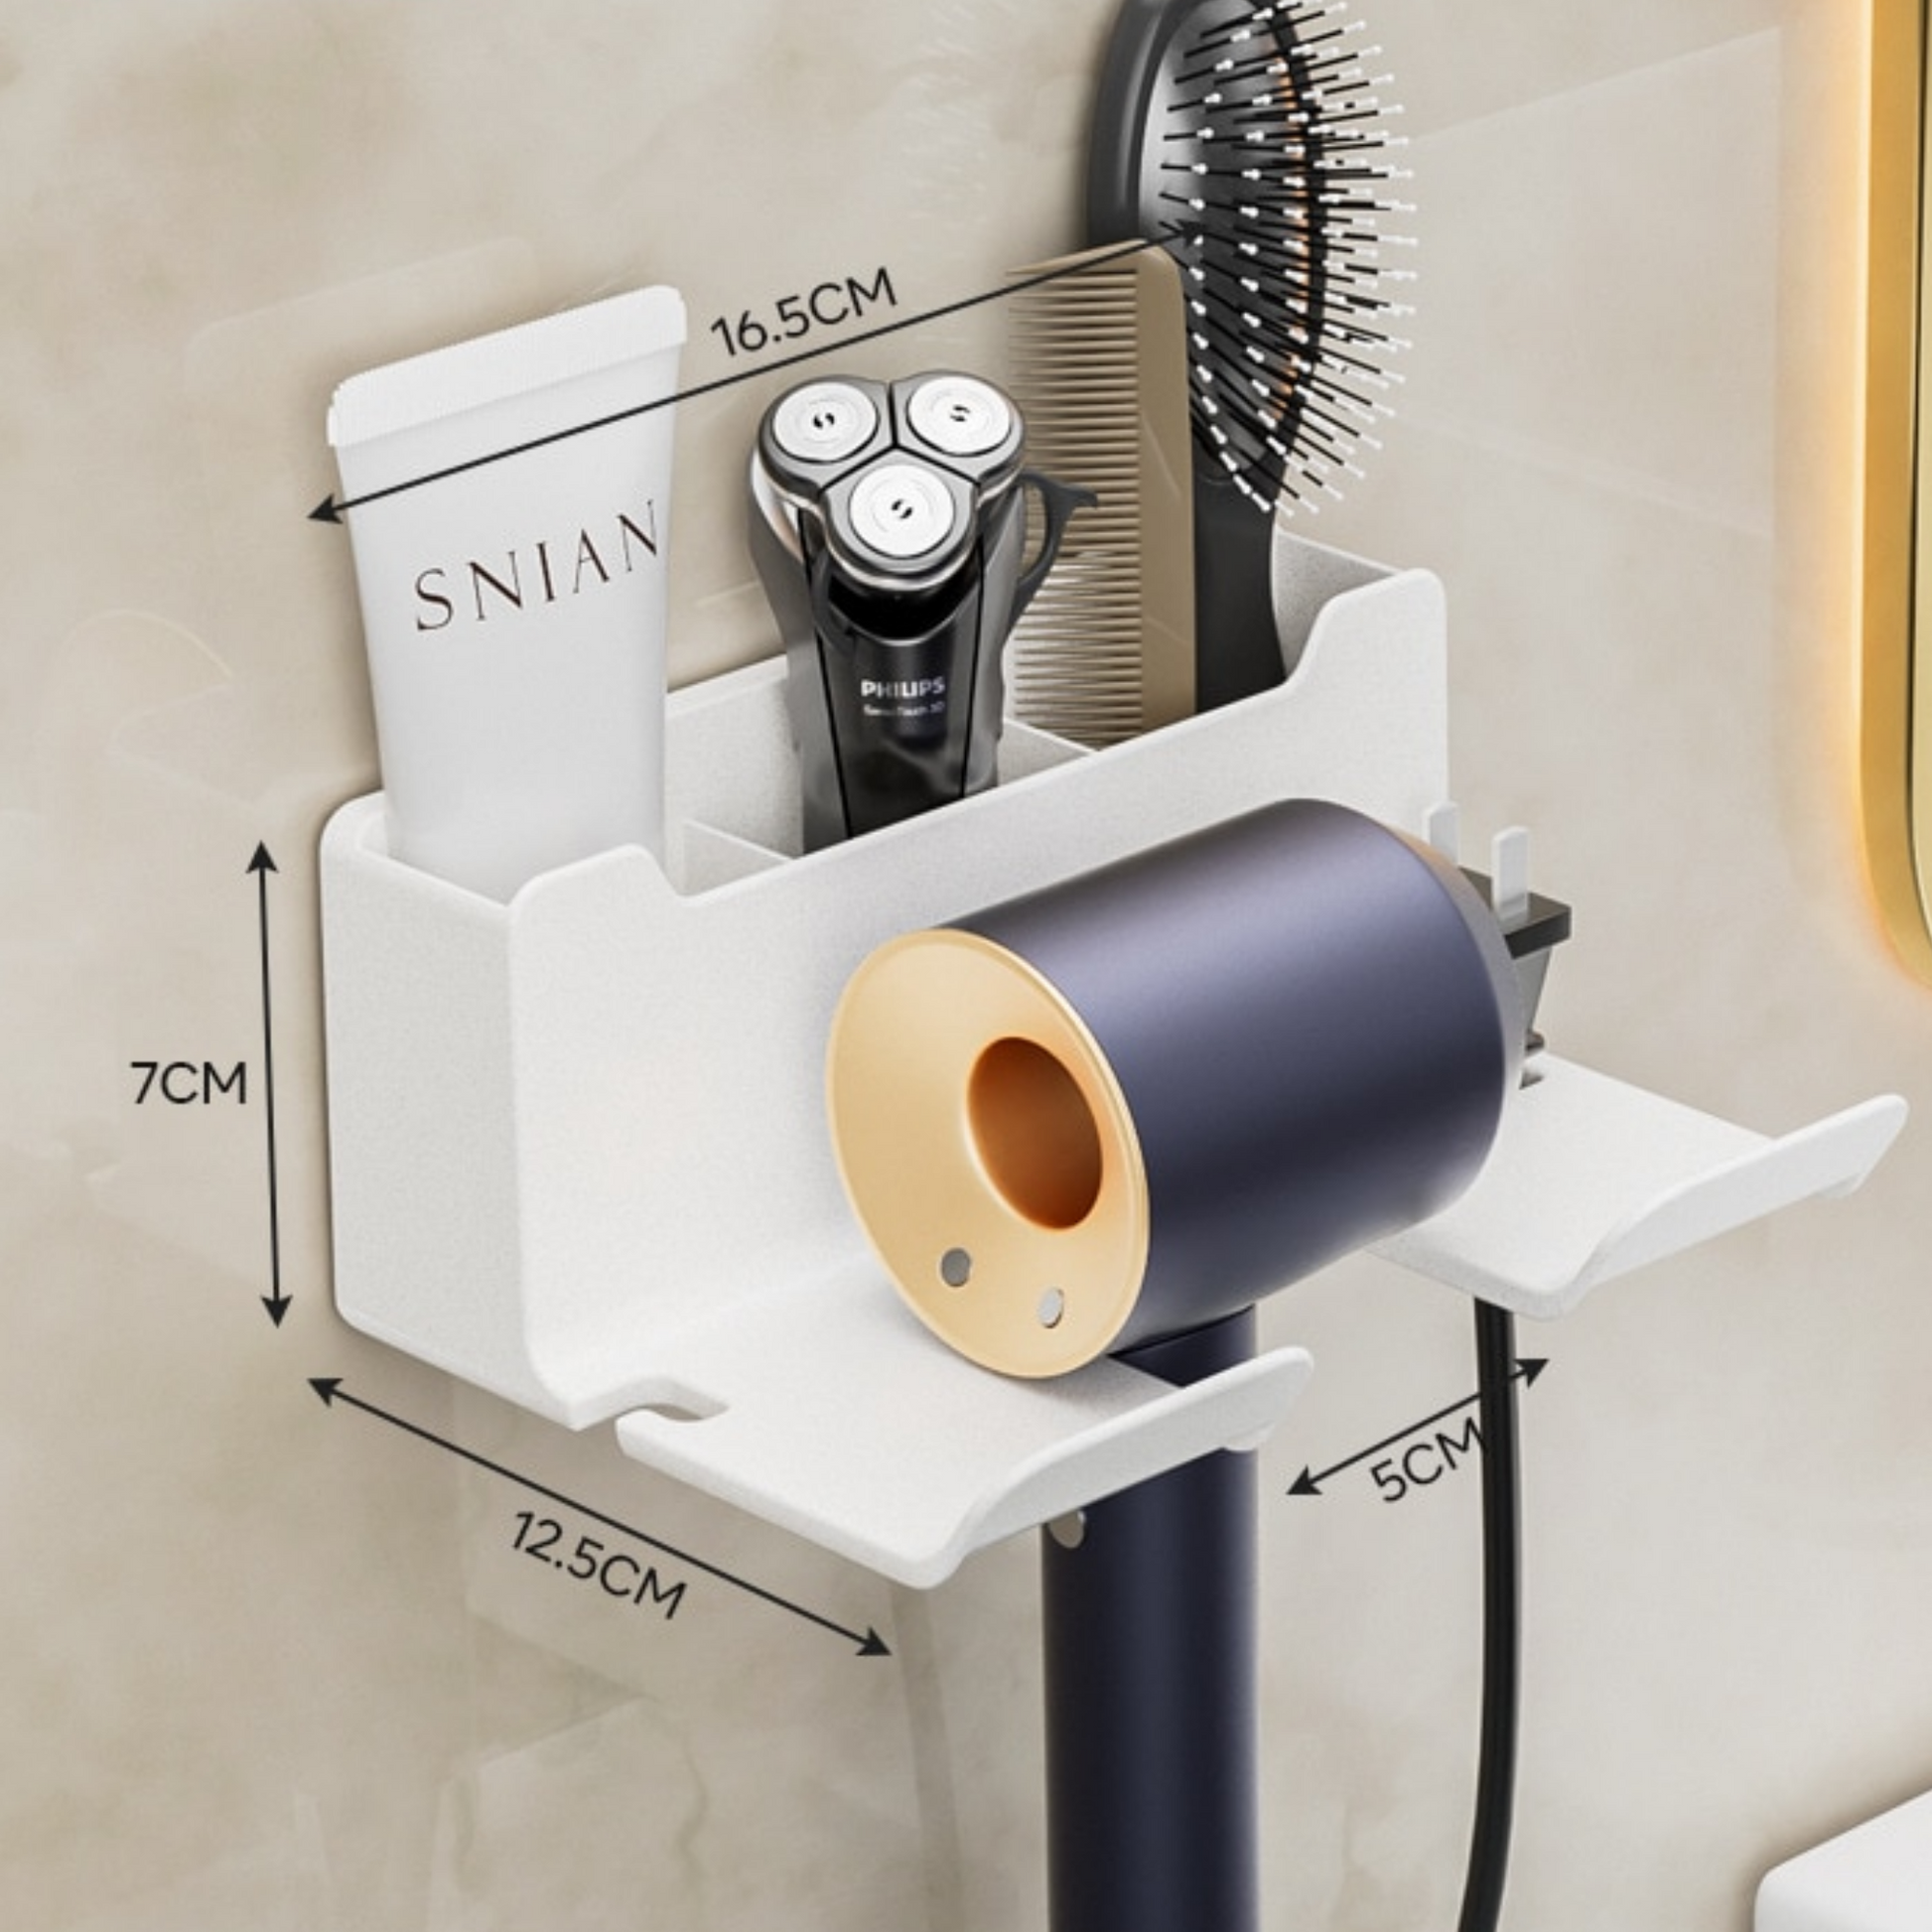 Wall-mounted hair dryer bracket with storage shelf and fan hanger - dimensions